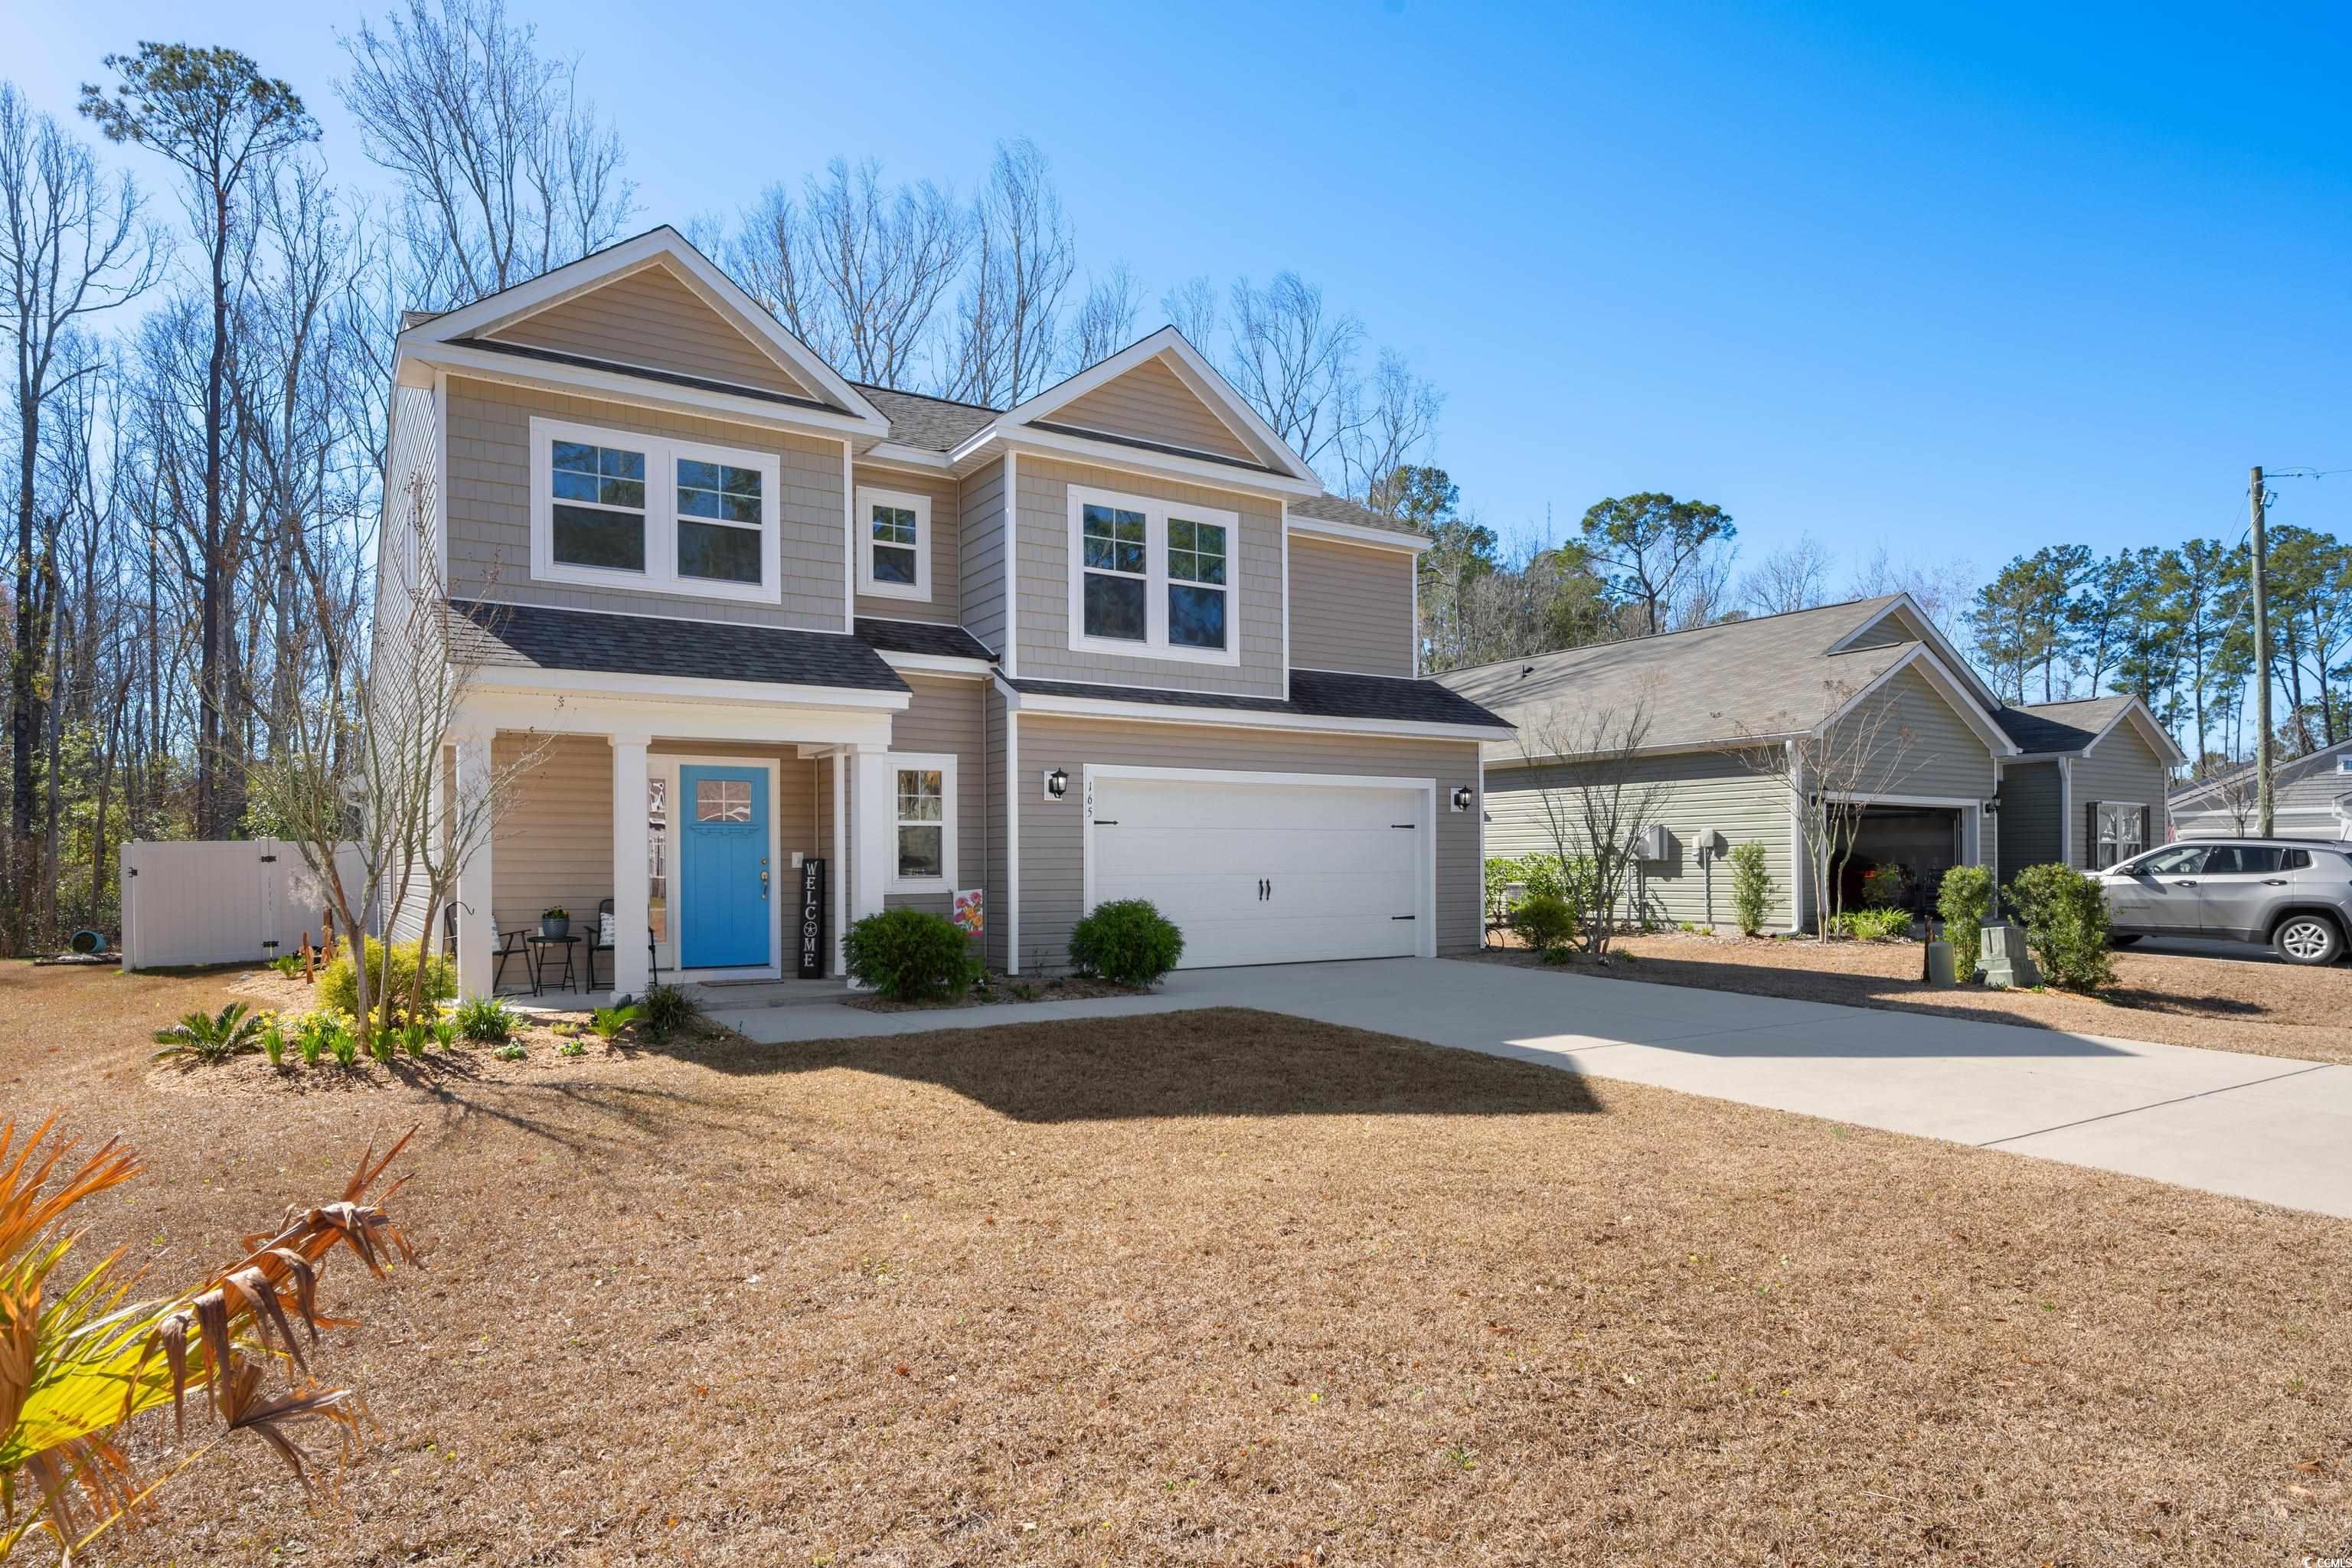 165 Clearwater Dr., Pawleys Island, SC 29585